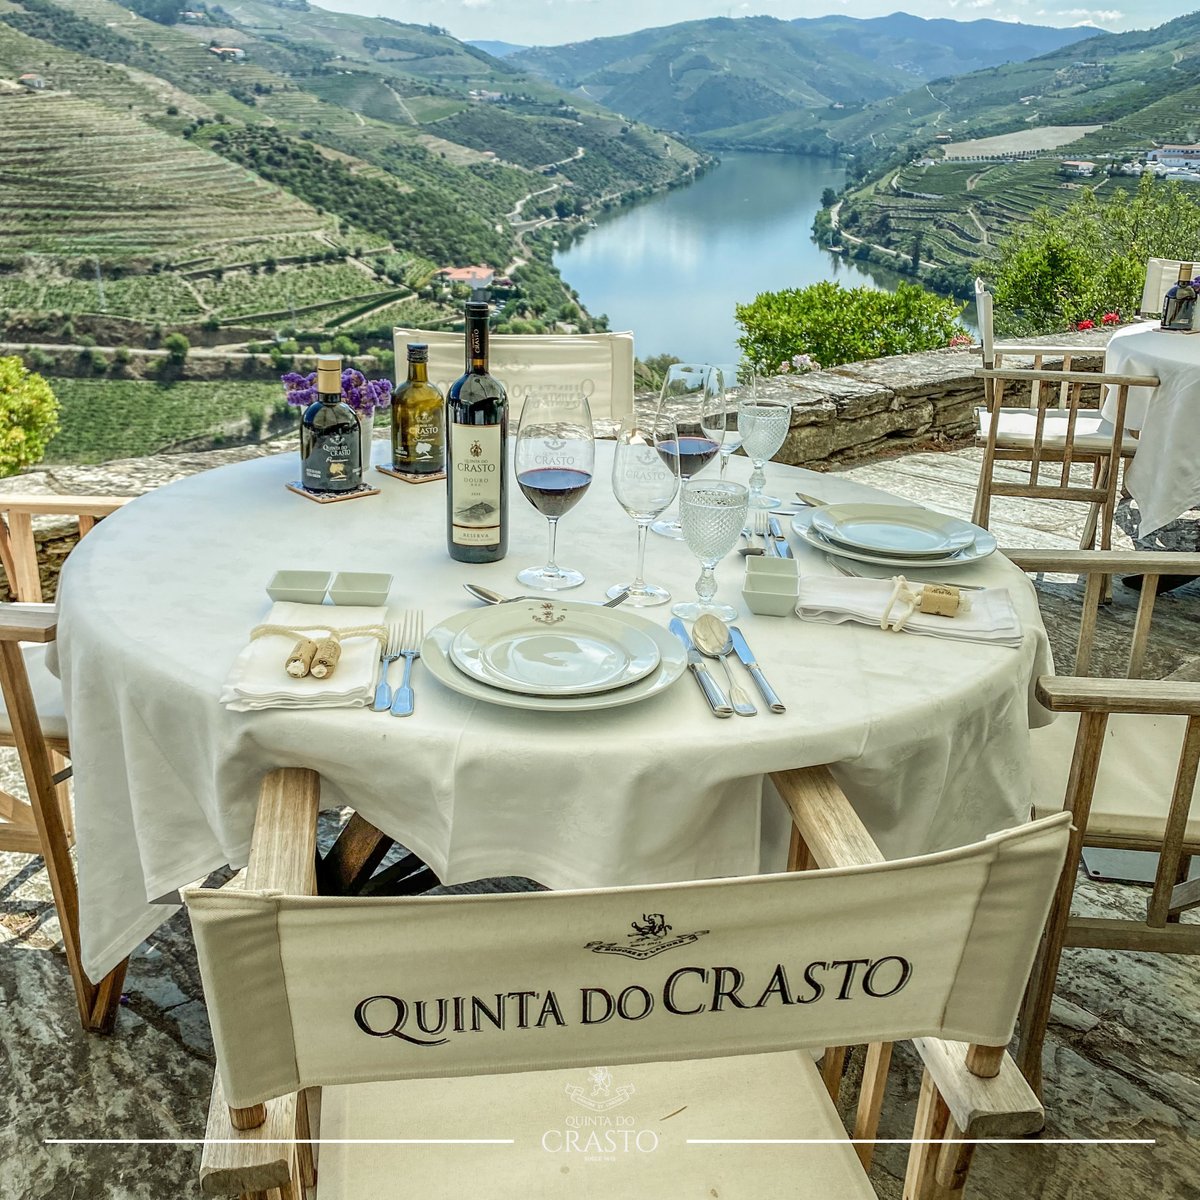 At Quinta do Crasto, the harmonized lunch of traditional cuisine included in the #Wine #Tourism programs includes the tasting of five #wines. Make your reservation in advance. 😉🍷🙌🏼👉🏼 To make a reservation, please contact via email at enoturismo@quintadocrasto.pt.😉
#Travel